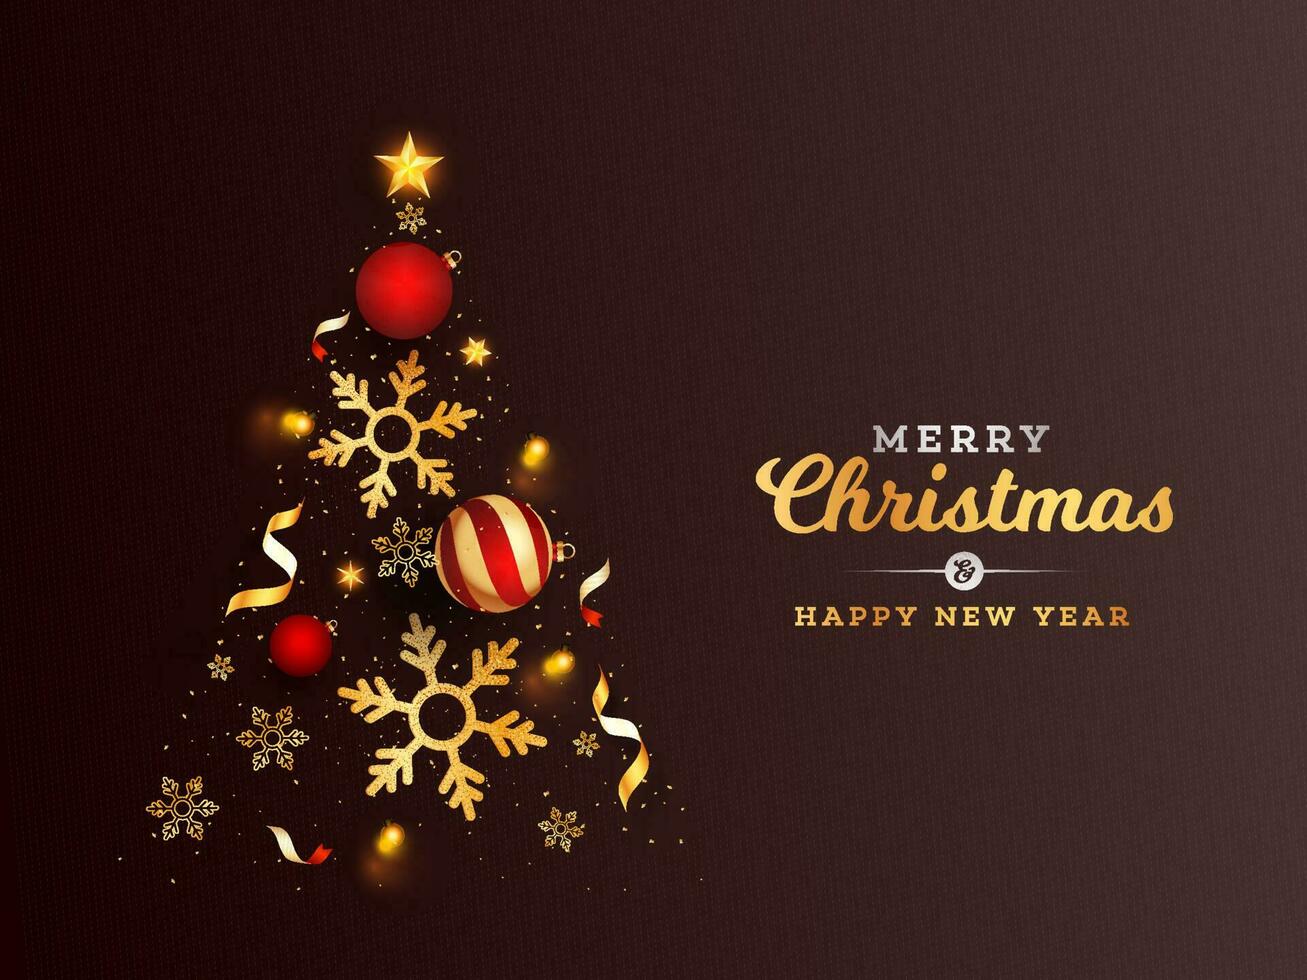 Creative Xmas tree made by golden stars, snowflakes and baubles on brown background for Merry Christmas and Happy New Year celebration. vector